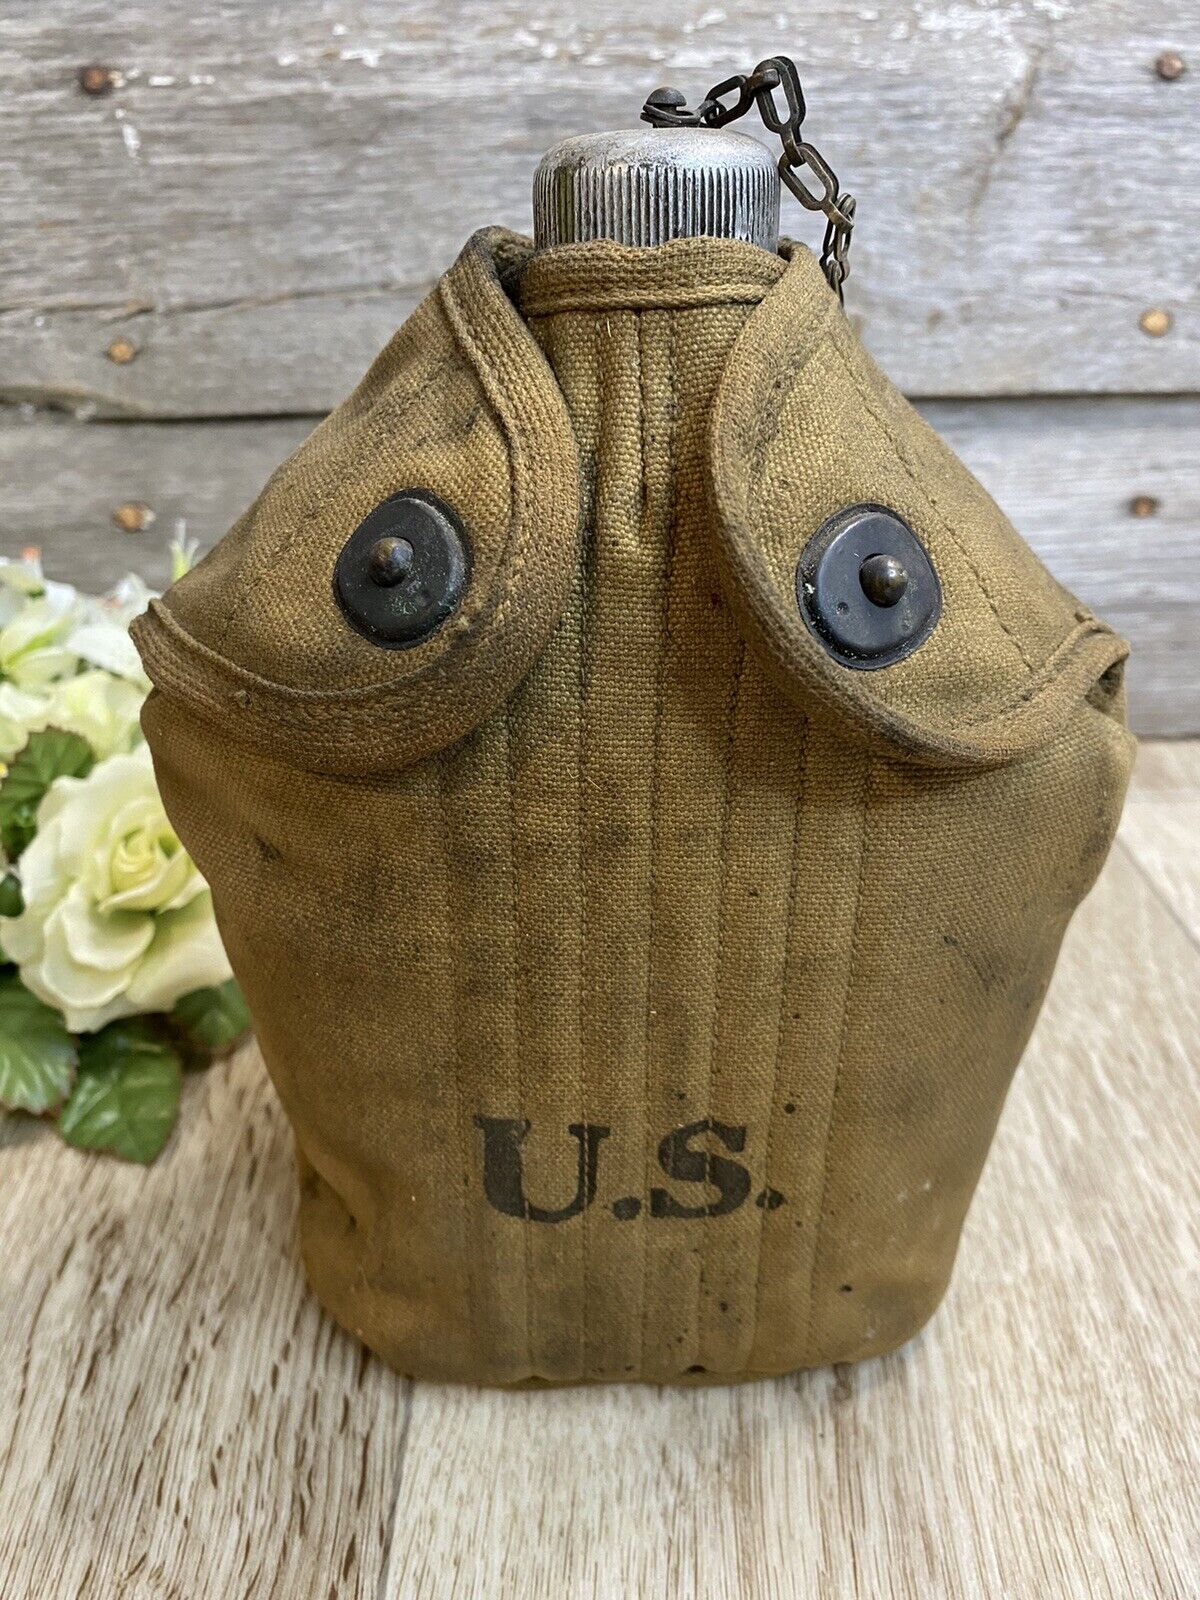 Vintage WWI US Military Canteen with Snap Cover Carry Case Brass Chain & Snaps